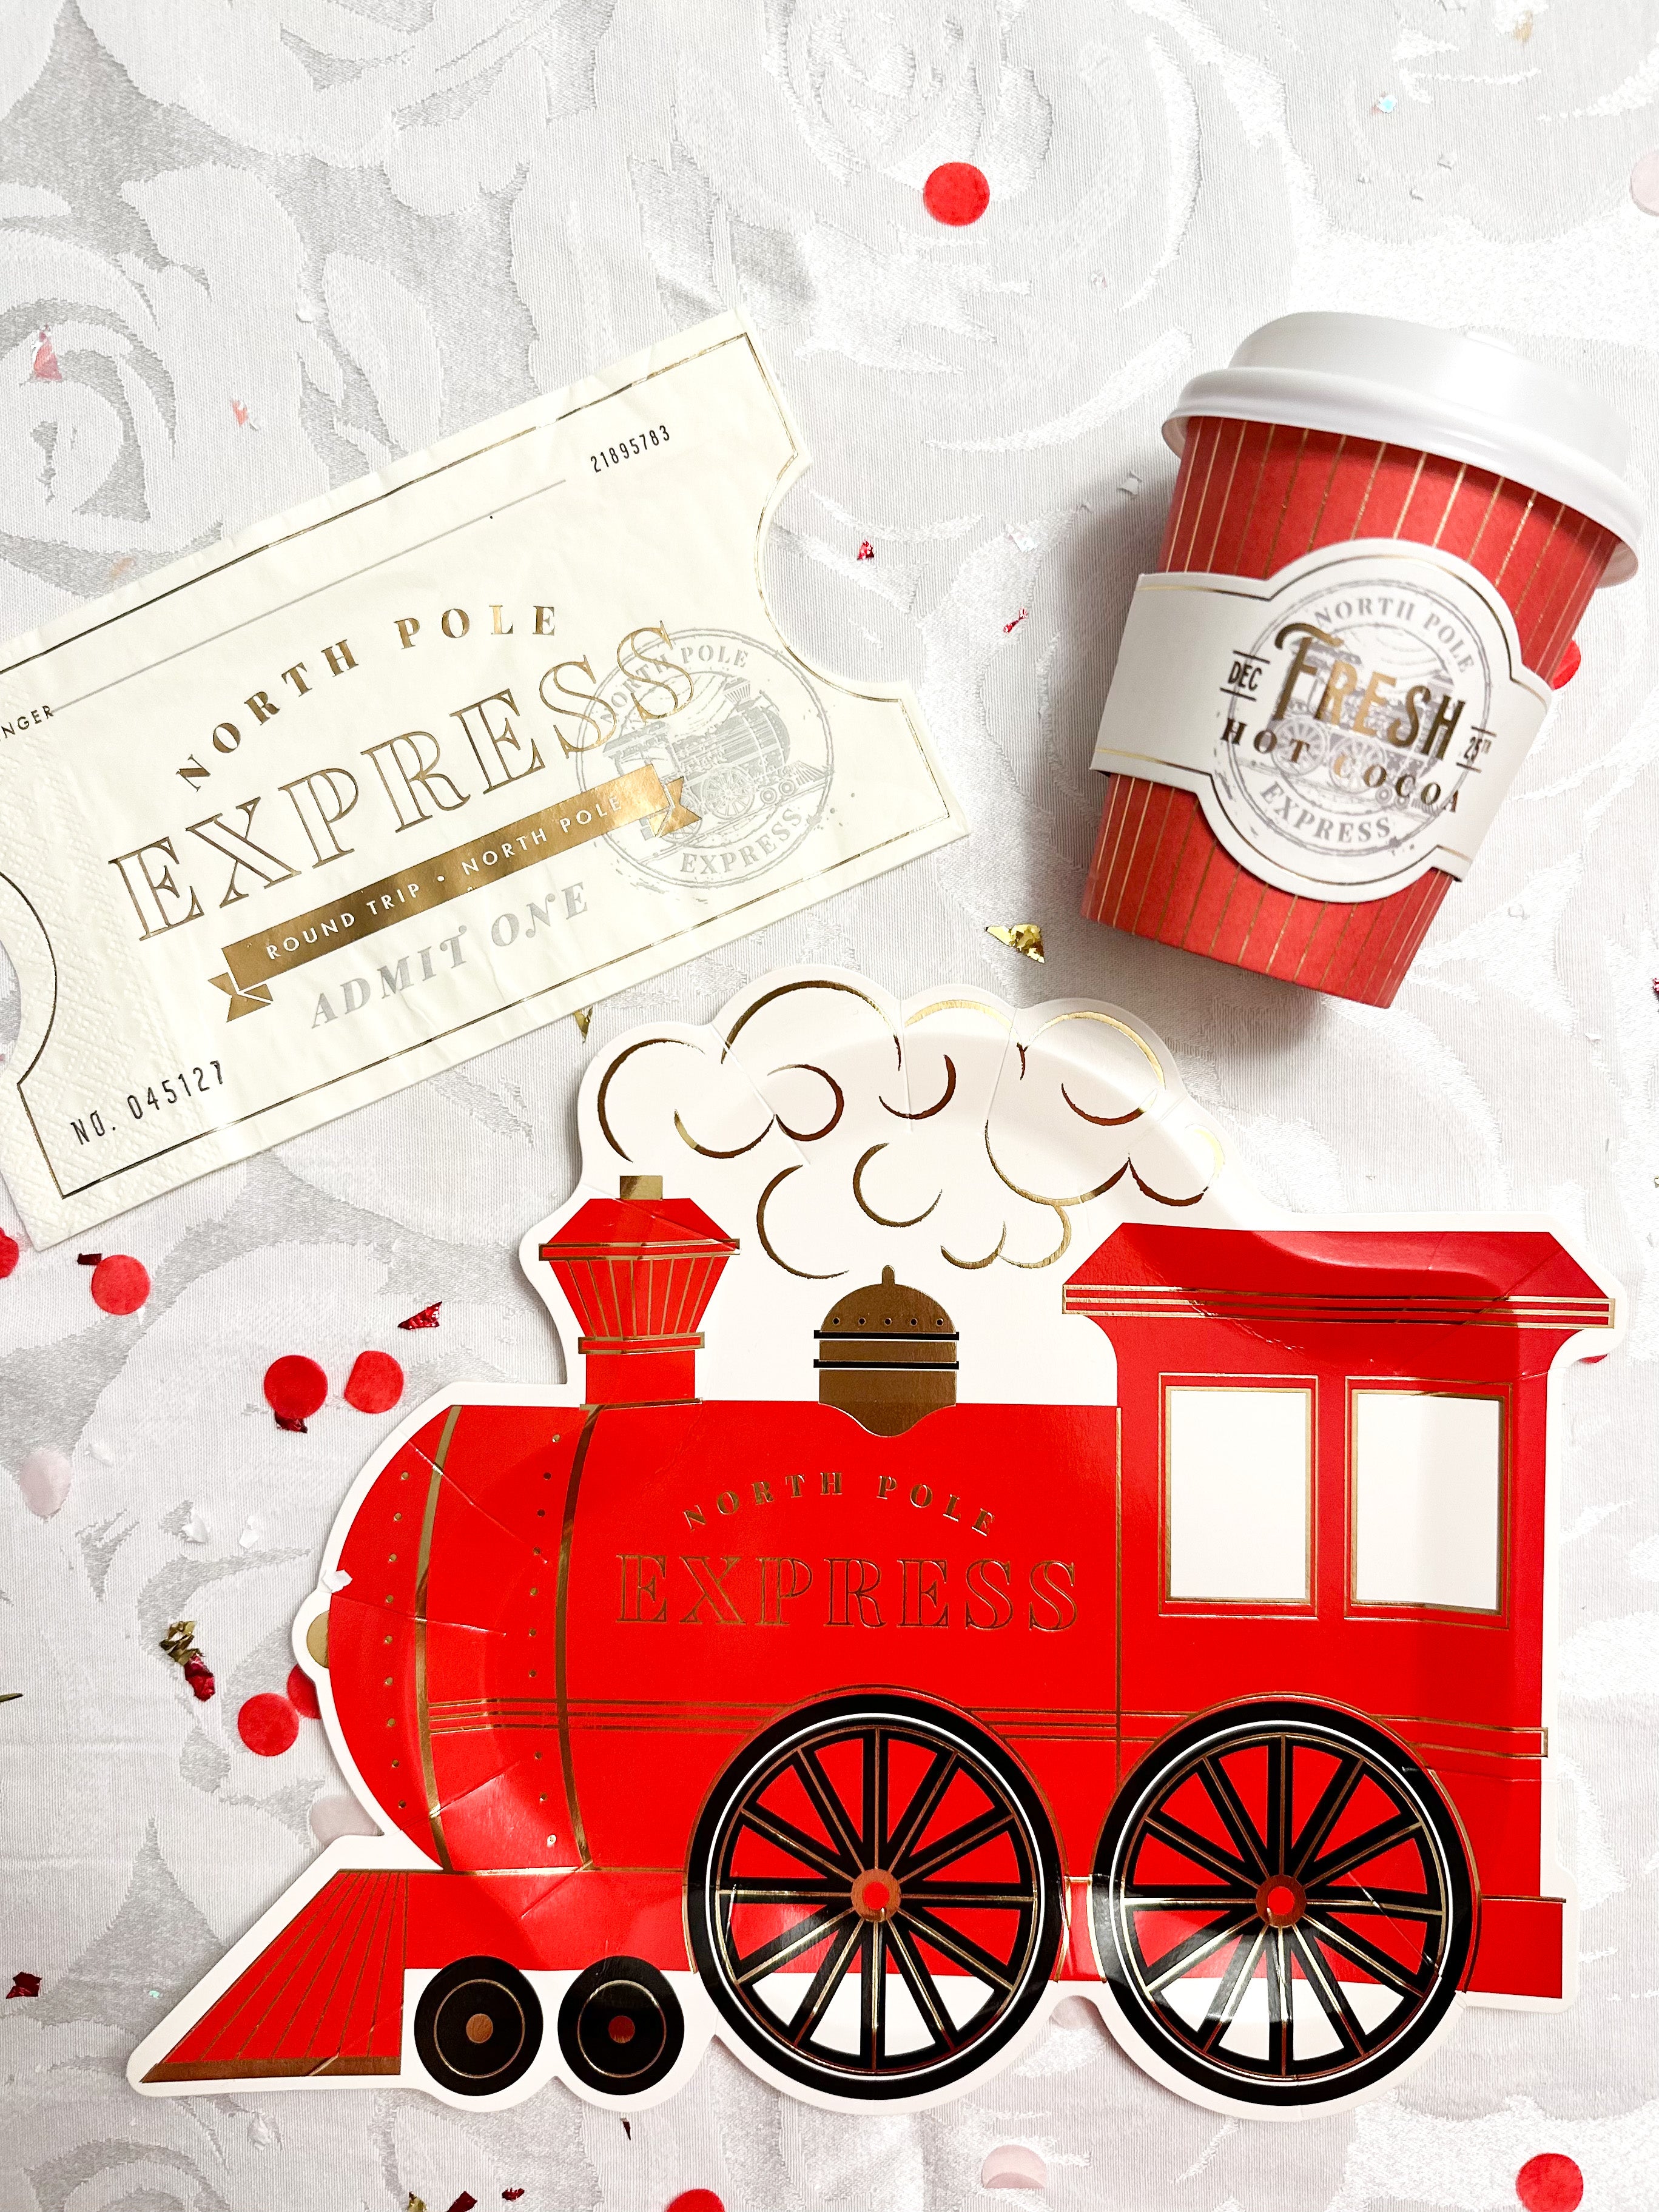 NORTH POLE EXPRESS TICKET SHAPED GUEST NAPKIN